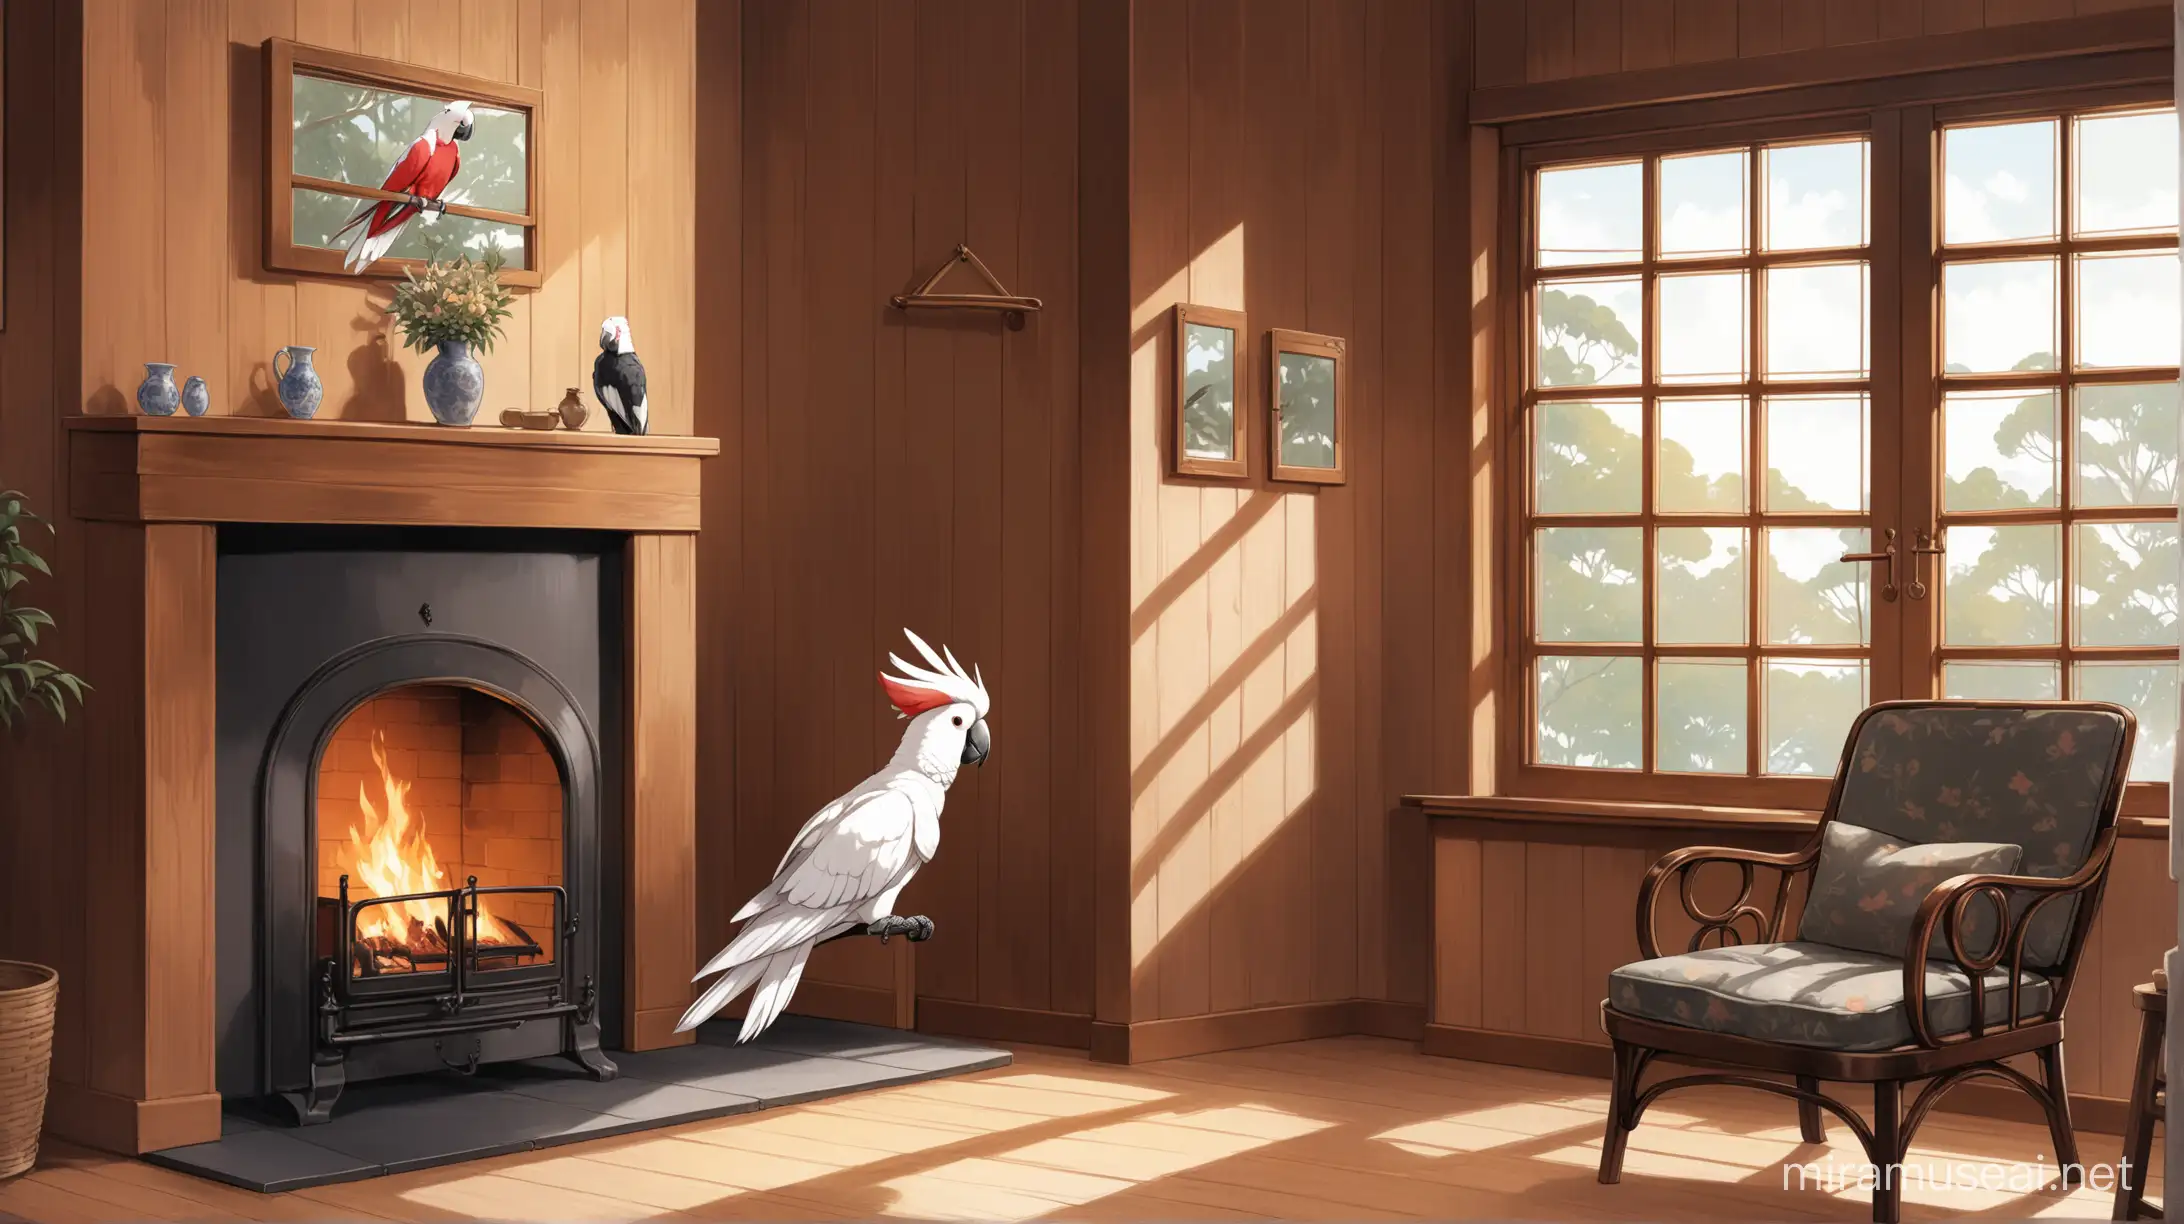 Cockatoo Perched on Chair with Fireplace View